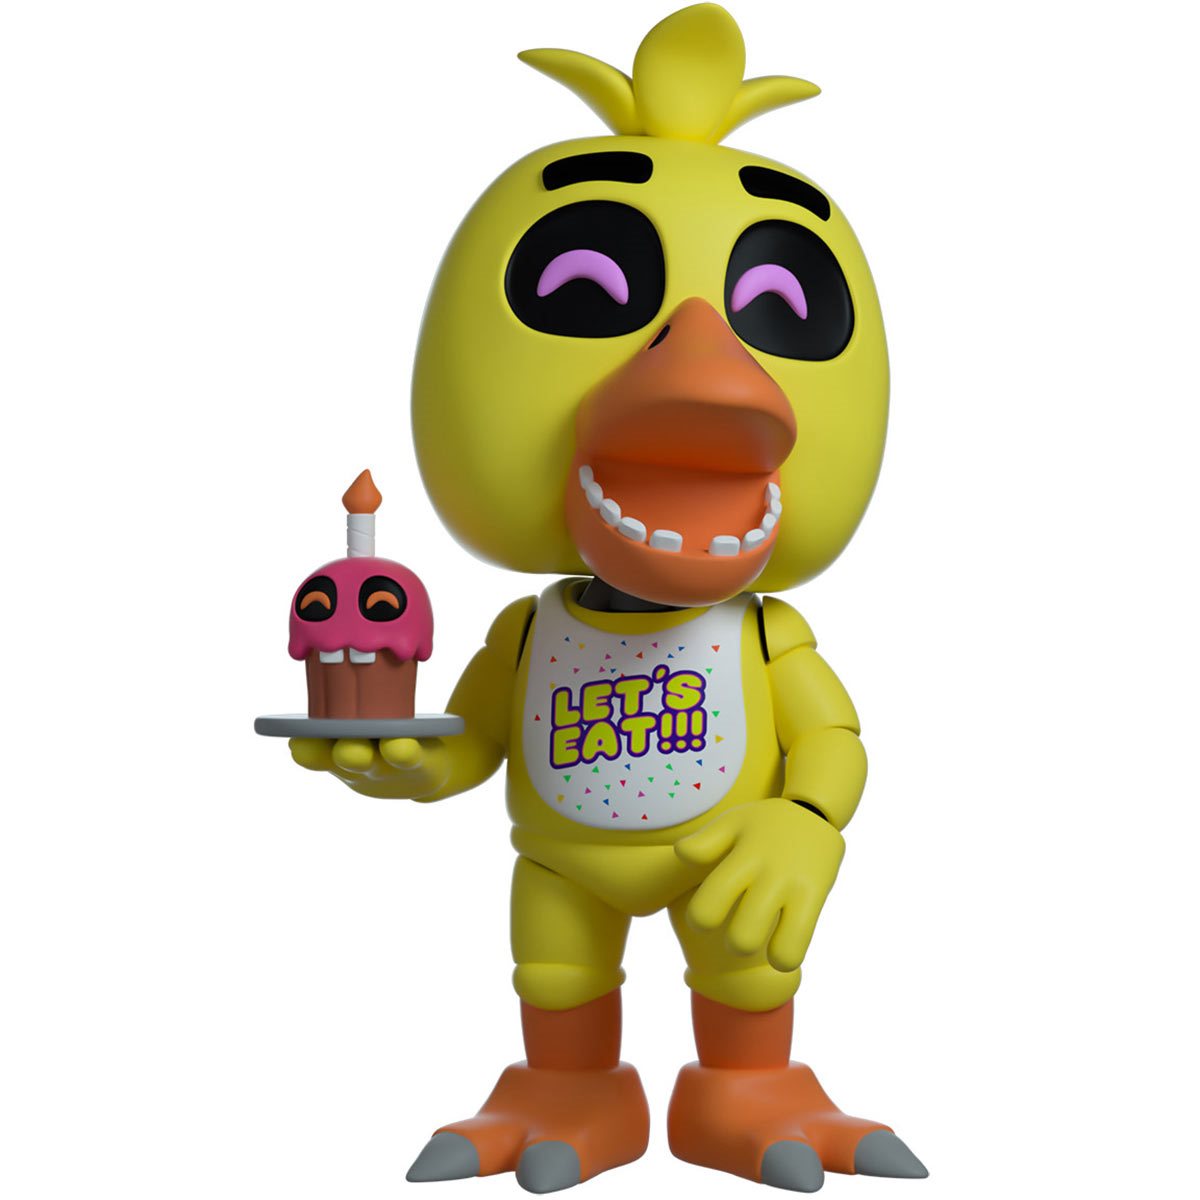 withered chica in vents｜TikTok Search